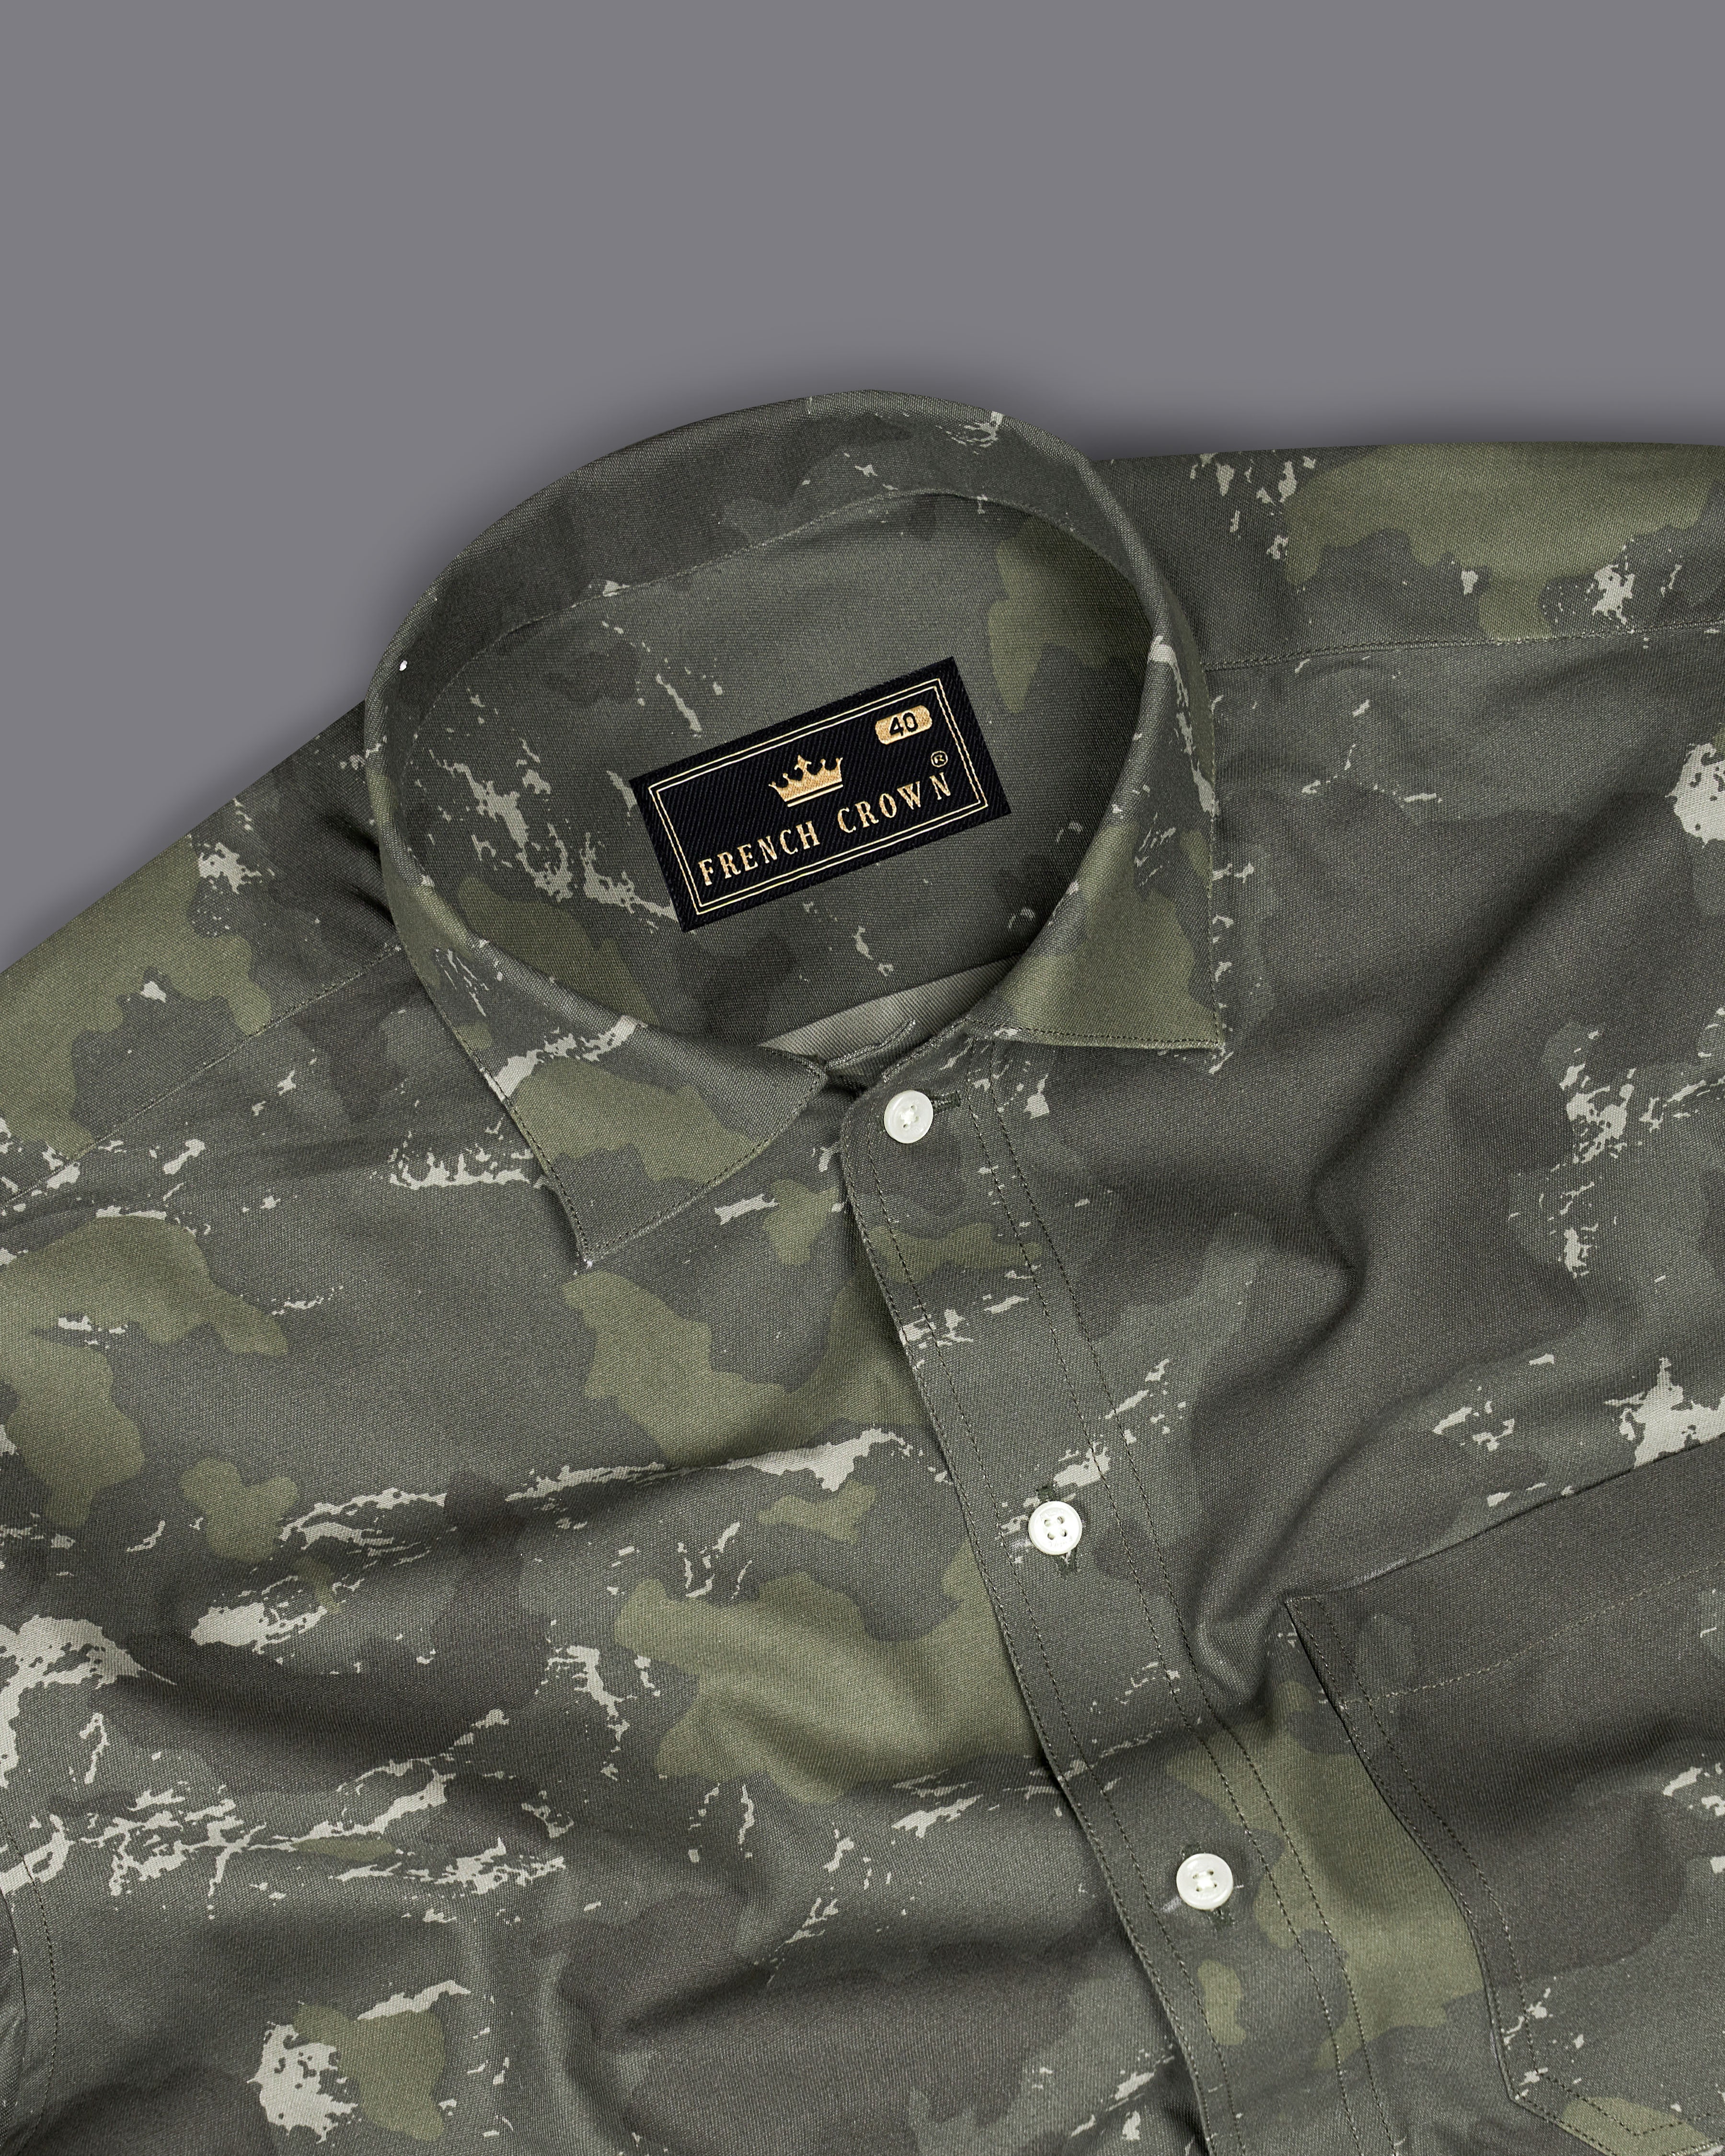 Lunar with Flintt Green and Nebula White Camouflage Royal Oxford Overshirt 9234-CA-OS-P278-38,9234-CA-OS-P278-H-38,9234-CA-OS-P278-39,9234-CA-OS-P278-H-39,9234-CA-OS-P278-40,9234-CA-OS-P278-H-40,9234-CA-OS-P278-42,9234-CA-OS-P278-H-42,9234-CA-OS-P278-44,9234-CA-OS-P278-H-44,9234-CA-OS-P278-46,9234-CA-OS-P278-H-46,9234-CA-OS-P278-48,9234-CA-OS-P278-H-48,9234-CA-OS-P278-50,9234-CA-OS-P278-H-50,9234-CA-OS-P278-52,9234-CA-OS-P278-H-52